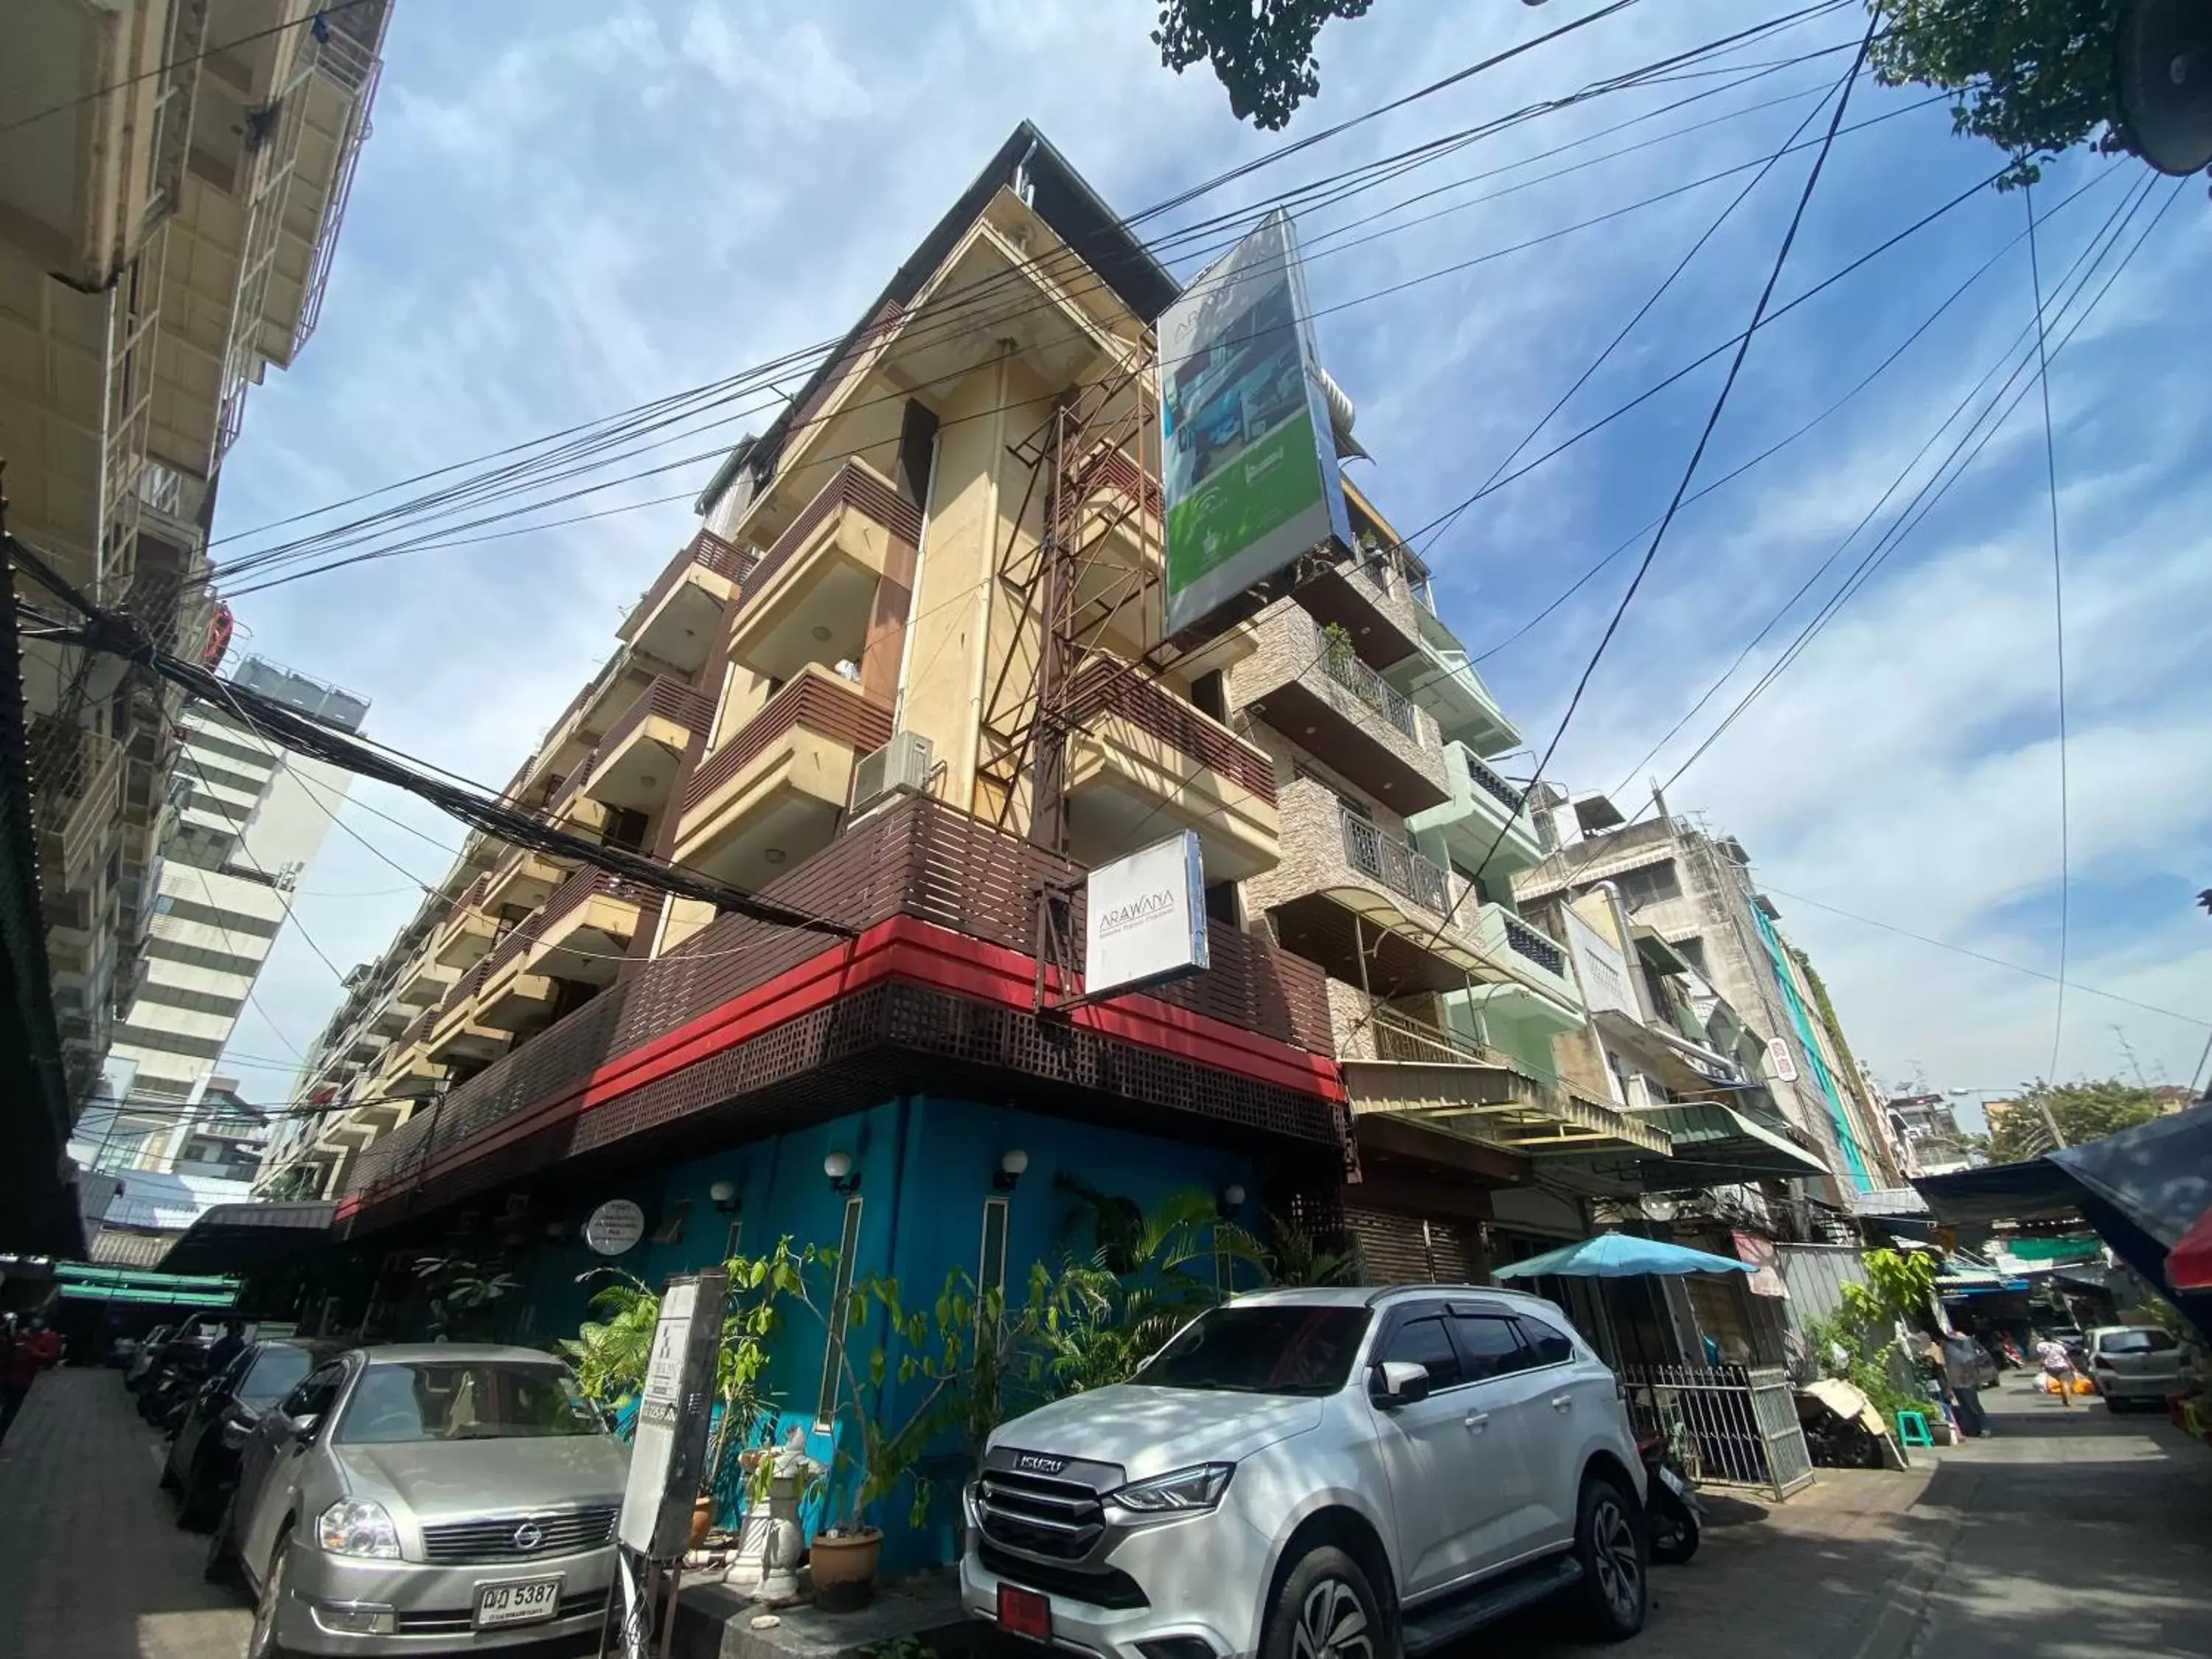 Property Building in Arawana Express Chinatown